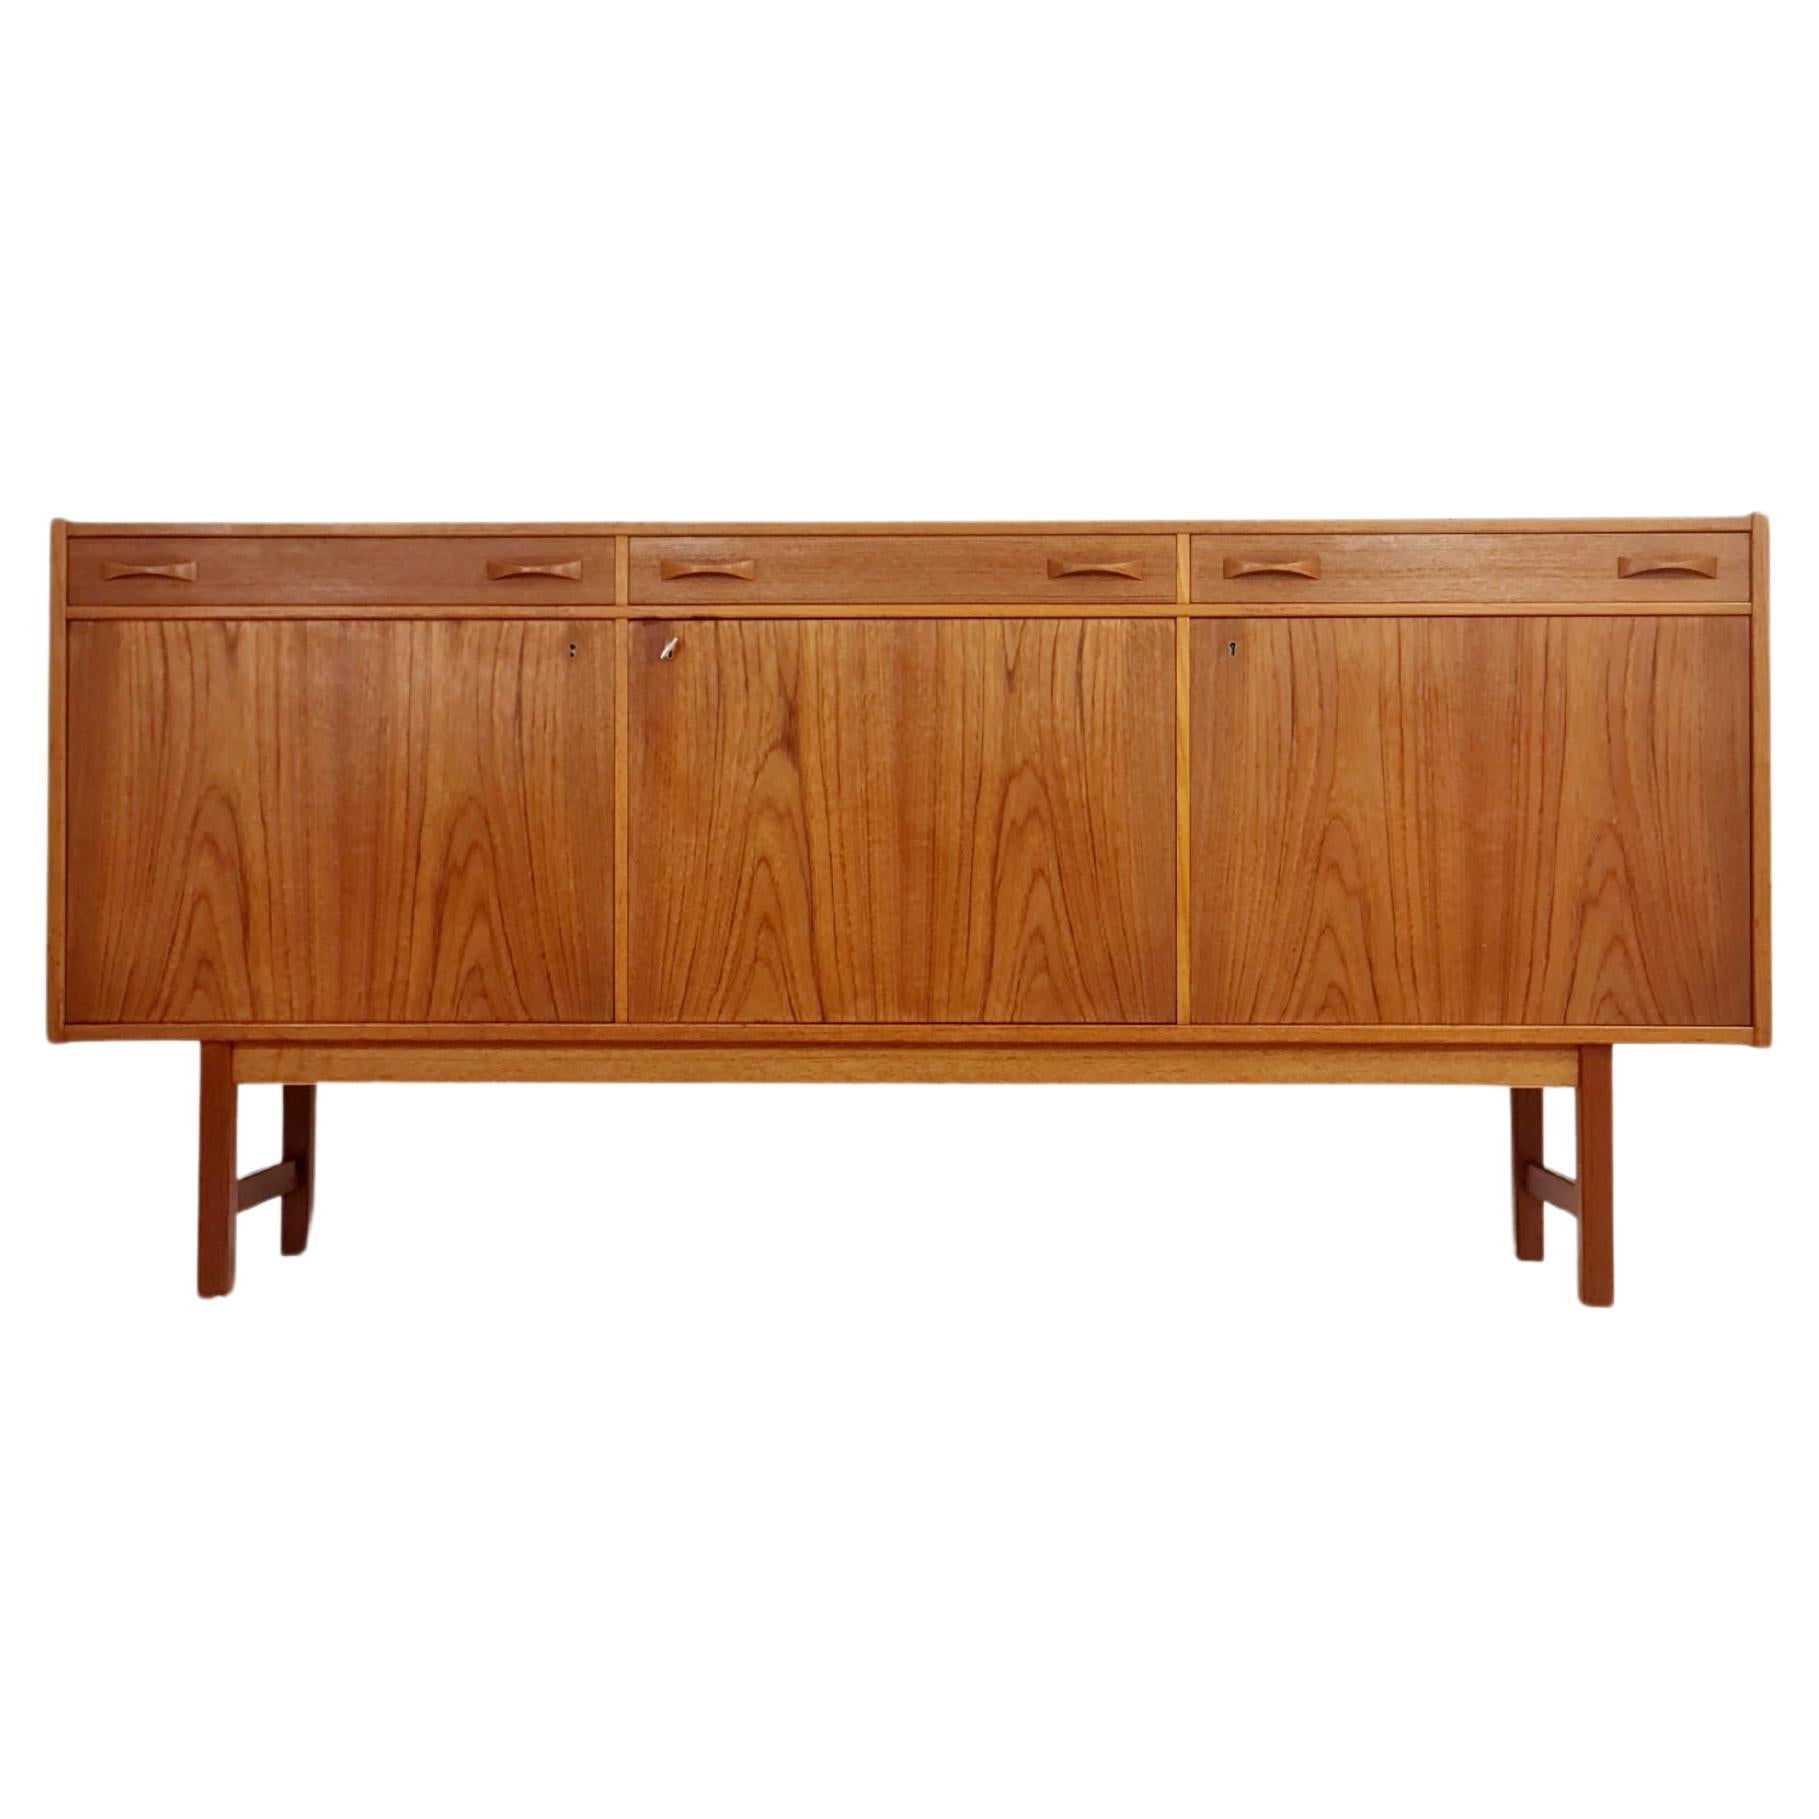 Mid century Swedish Teak Sideboard by Tage Olofsson for Ulferts, 1960s For Sale